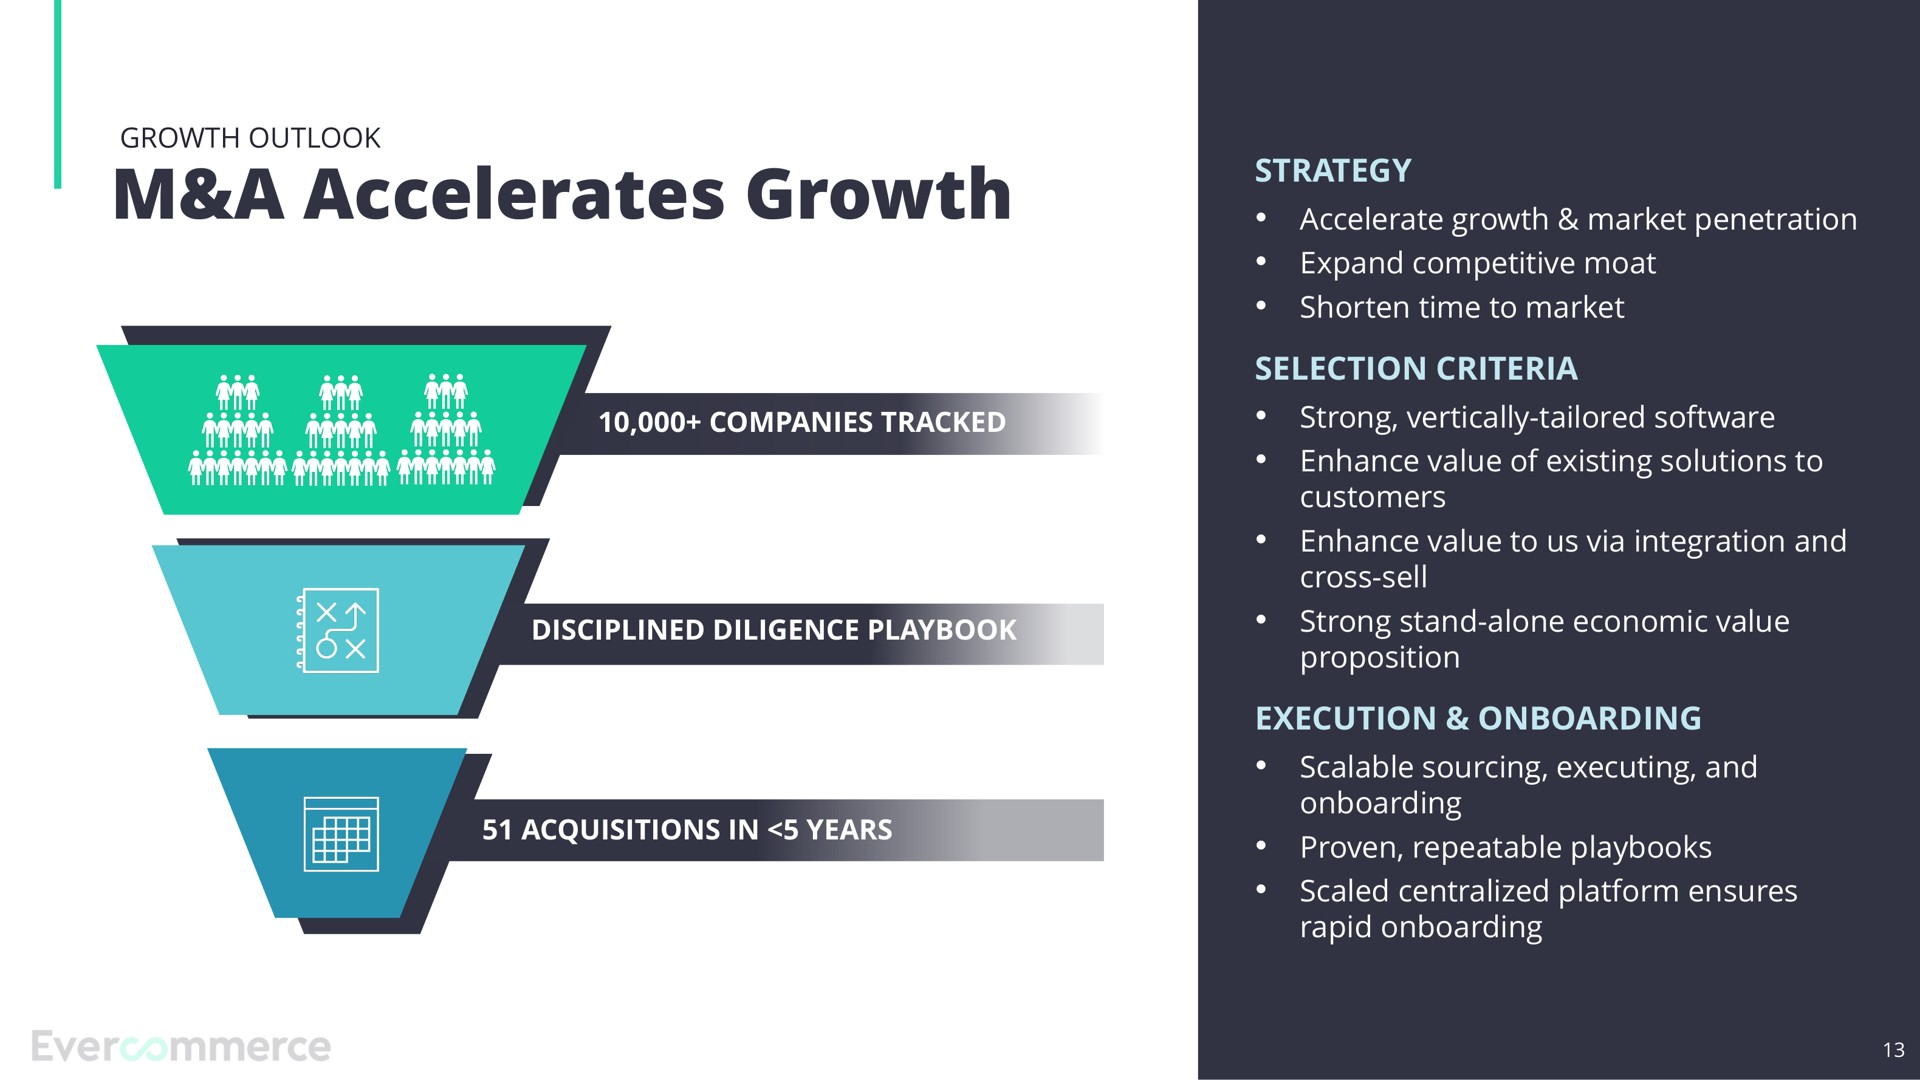 a accelerates growth | EverCommerce